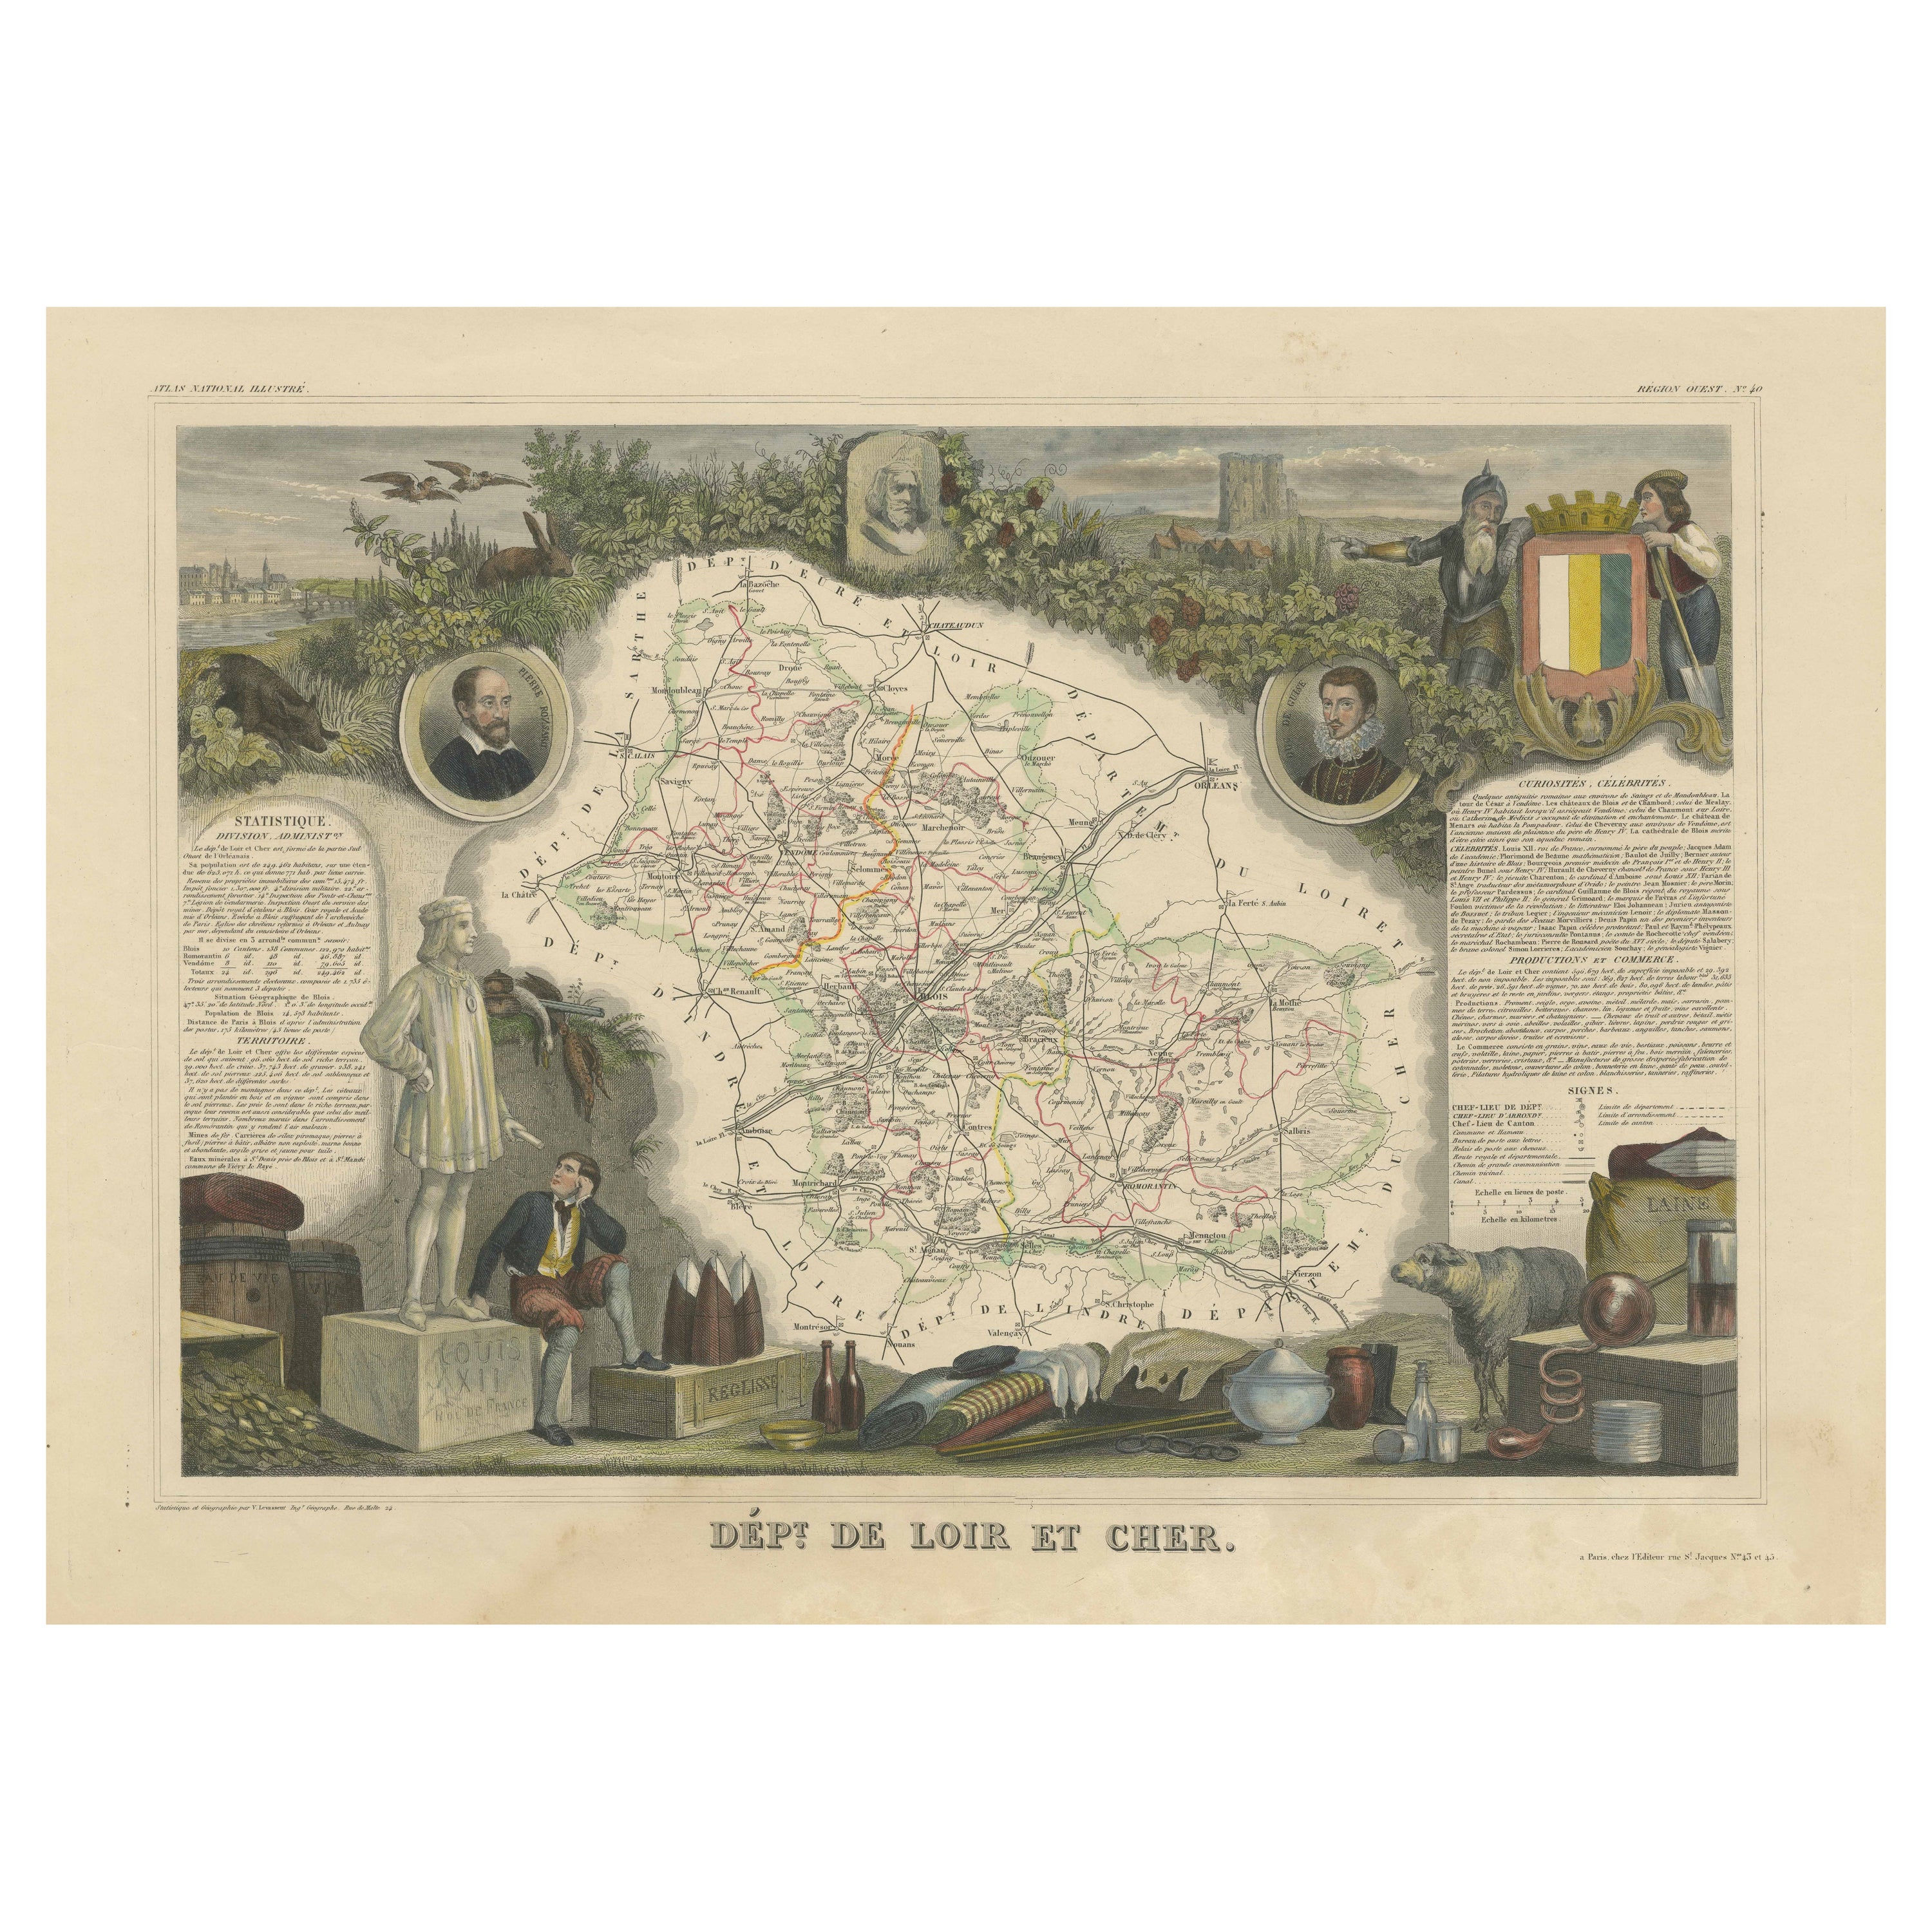 Old Map of the French Department of Loir-et-cher, France For Sale